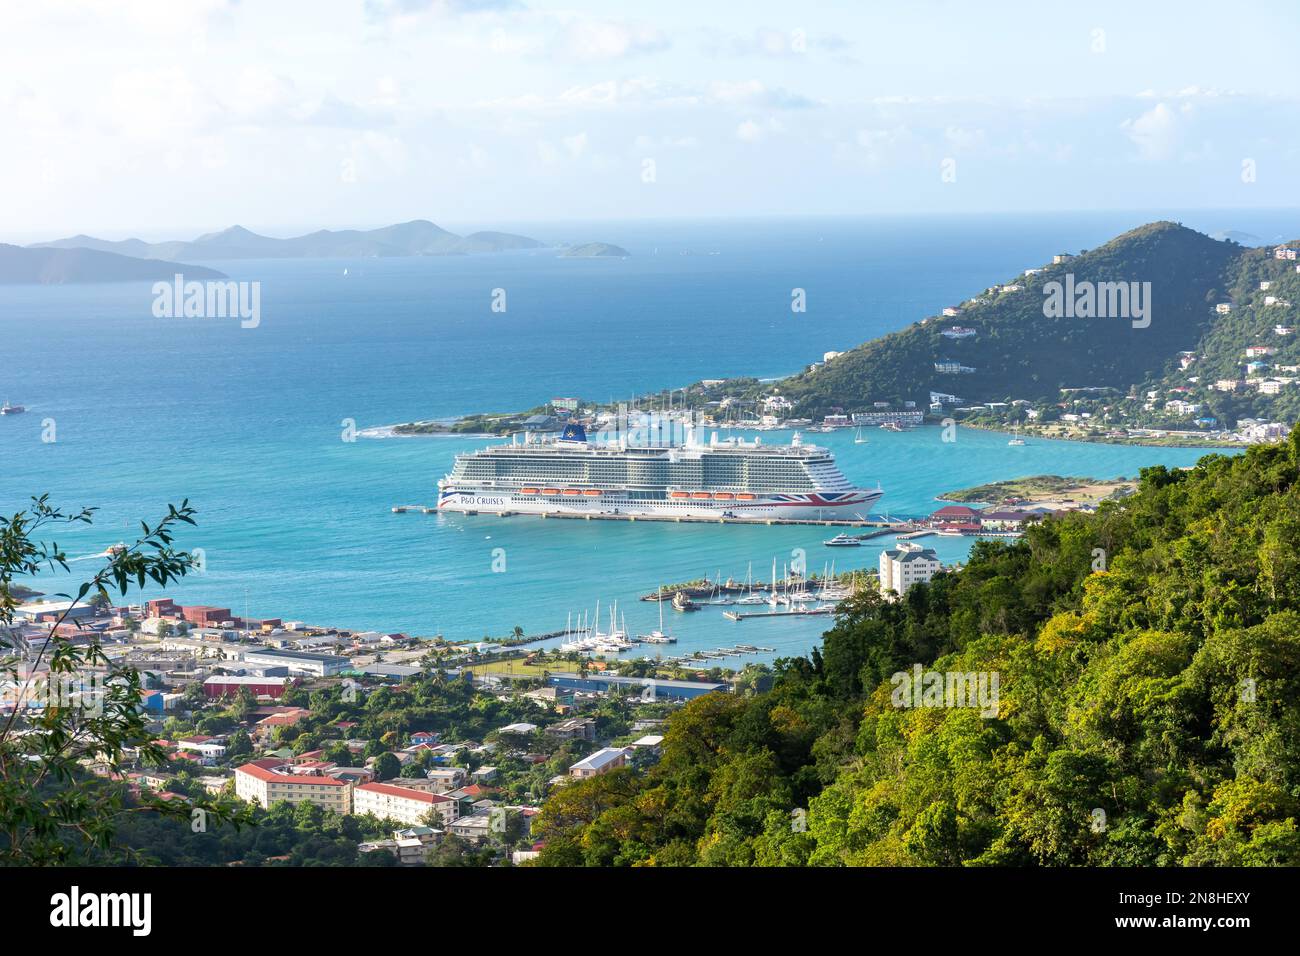 P&O Cruise ship docked in  Road Town from Ridge Road lookout, Tortola, The British Virgin Islands (BVI), Lesser Antilles, Caribbean Stock Photo